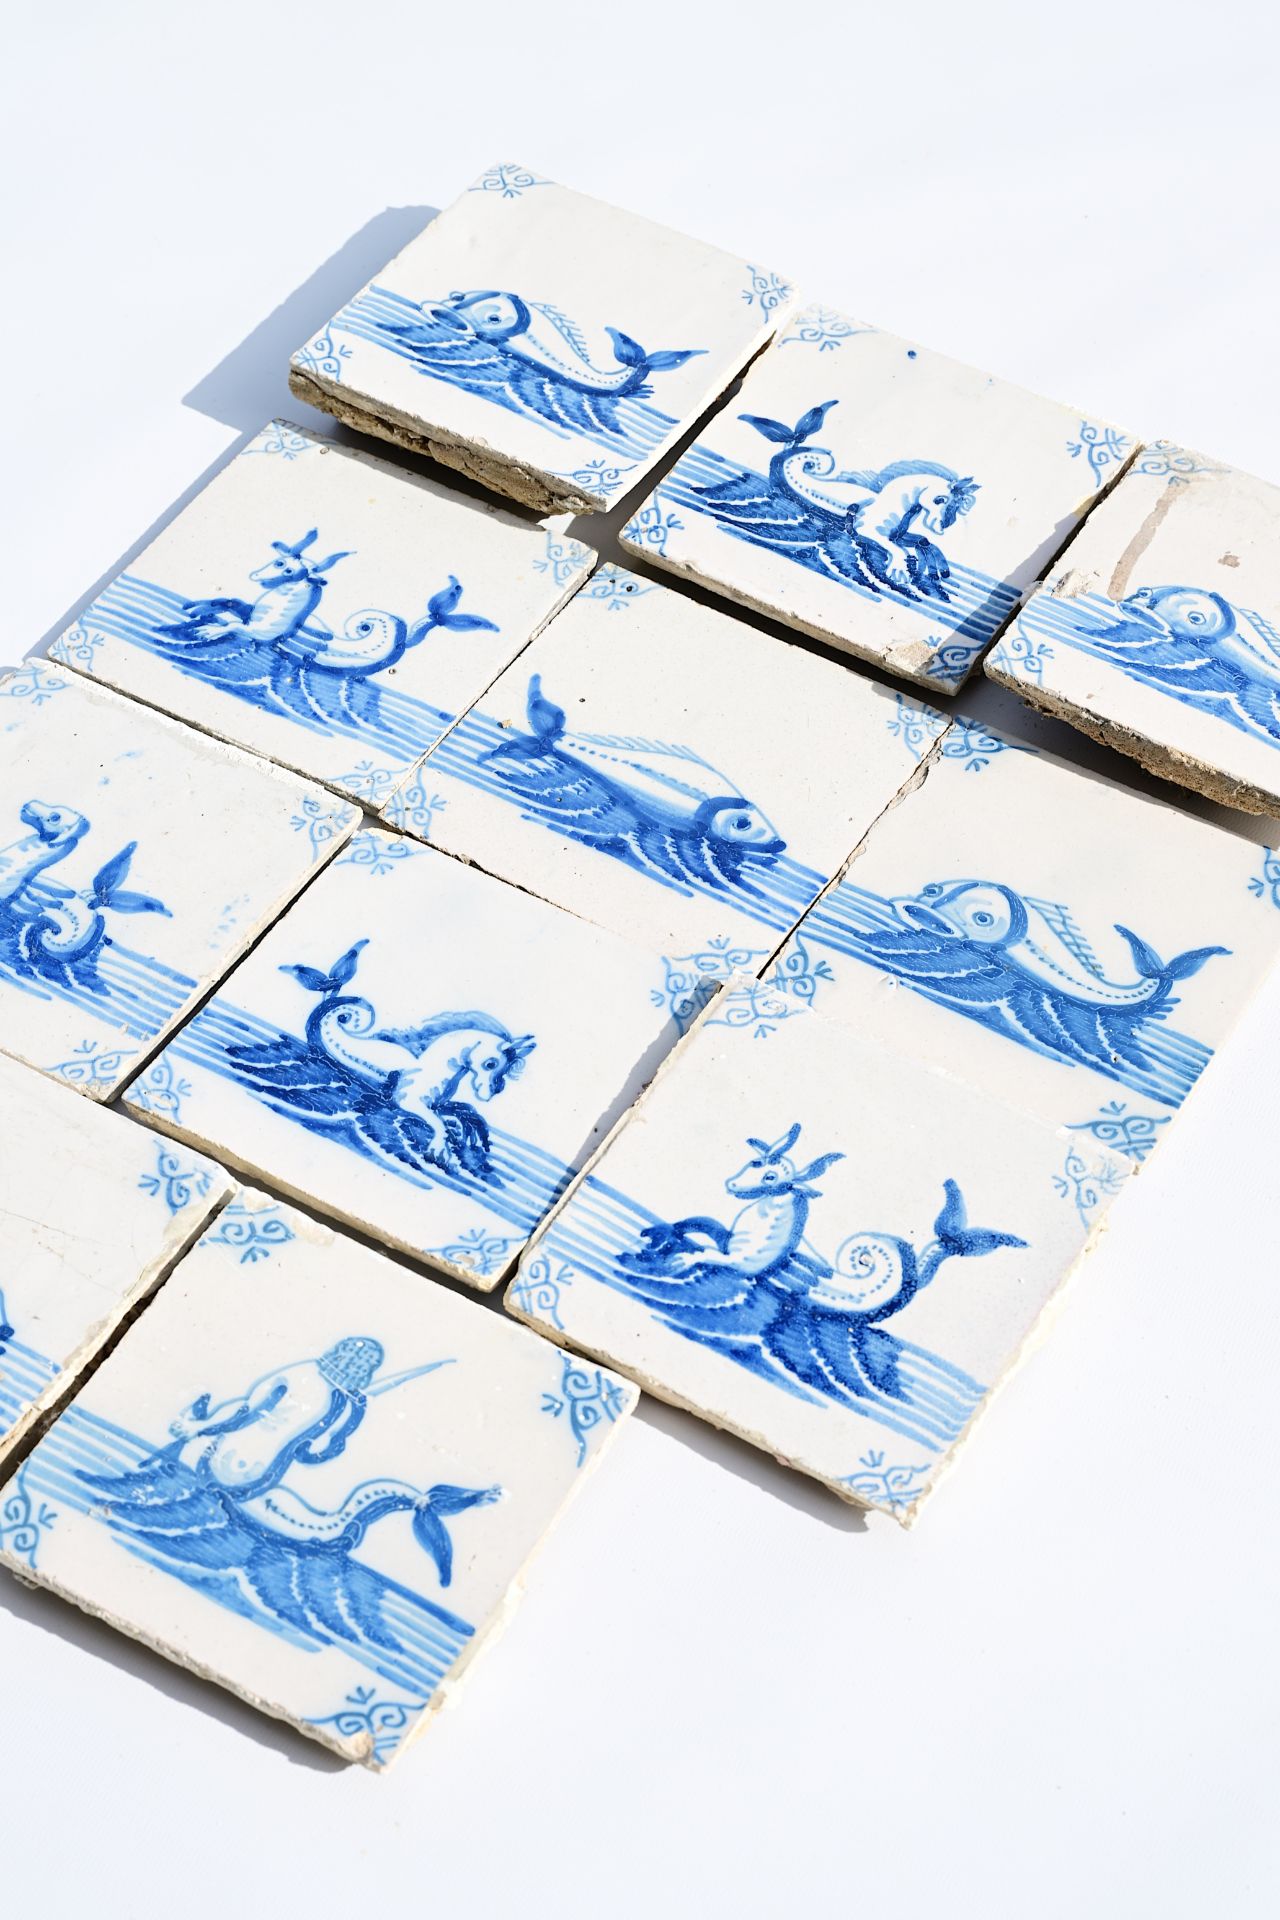 Eleven Dutch Delft blue and white 'sea monster' tiles, 19th C. - Image 3 of 3